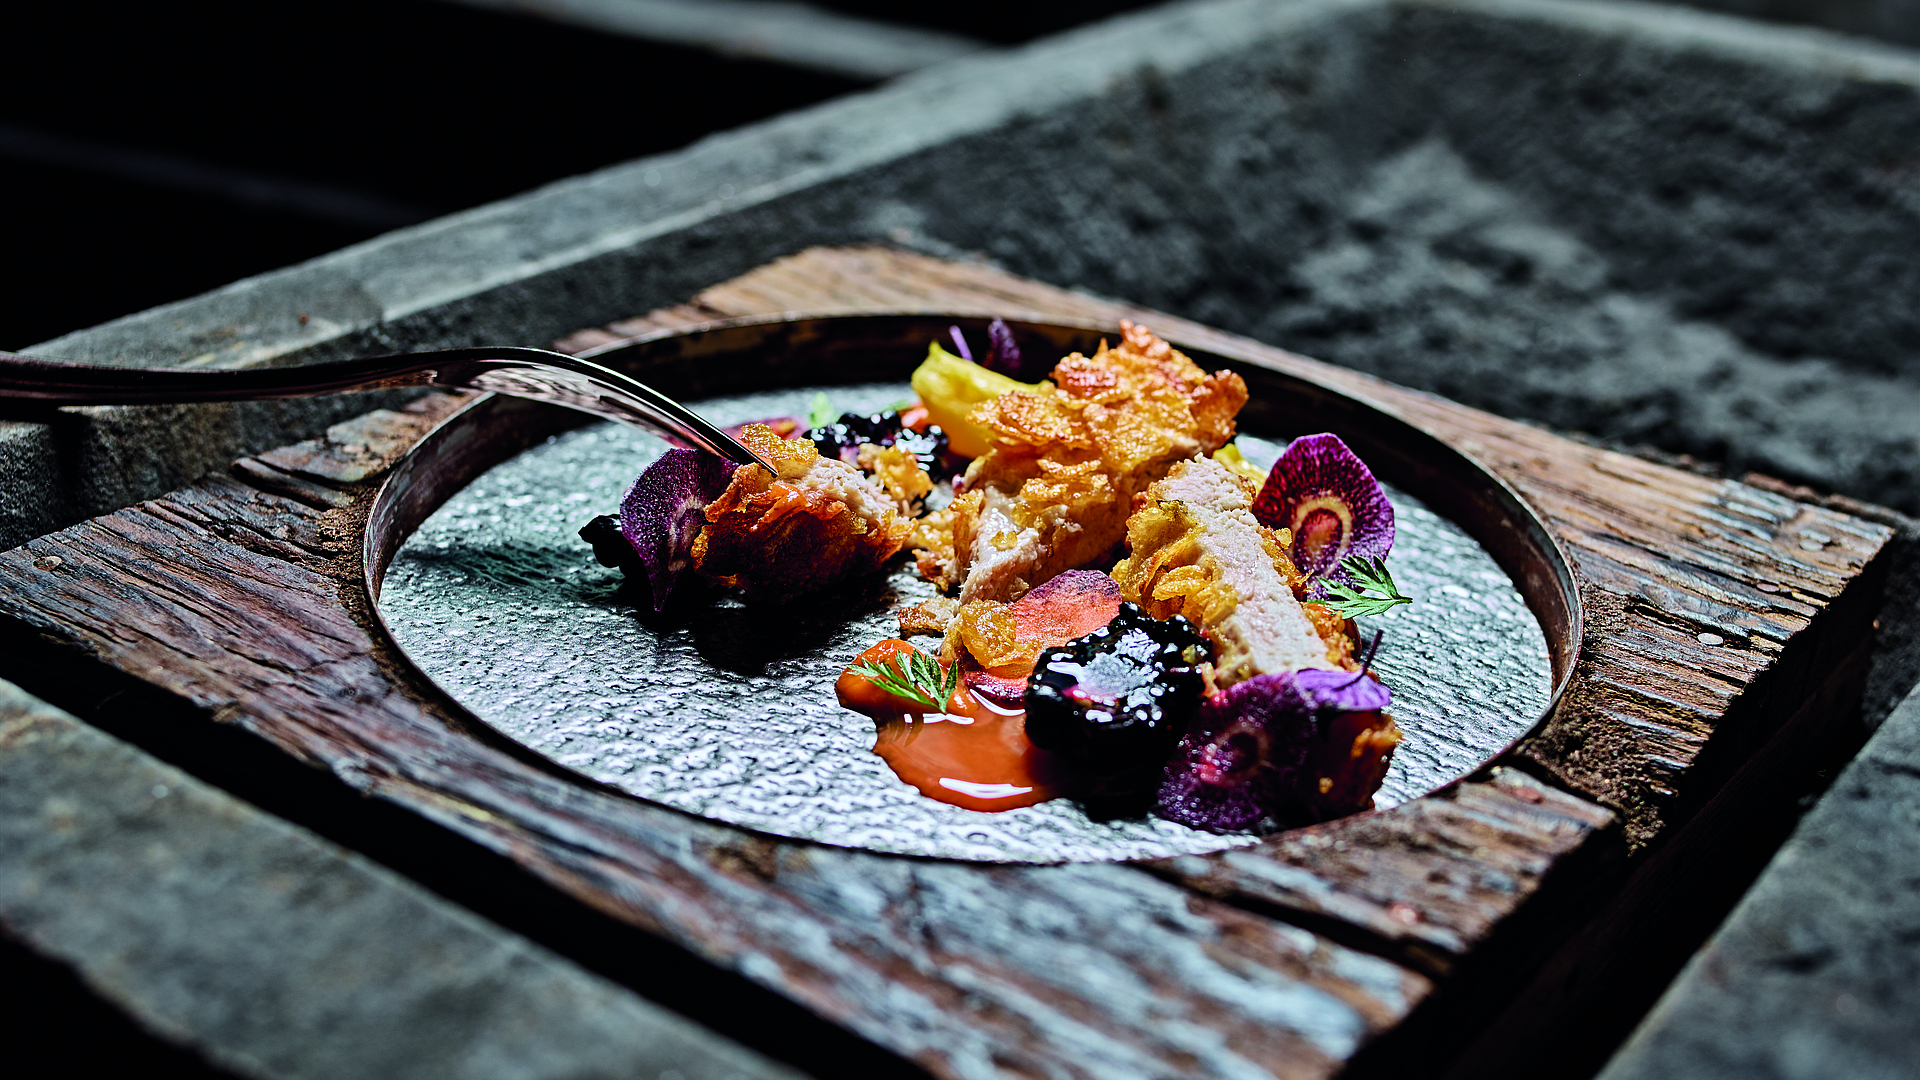 Breast of guinea fowl with cornflakes and berries